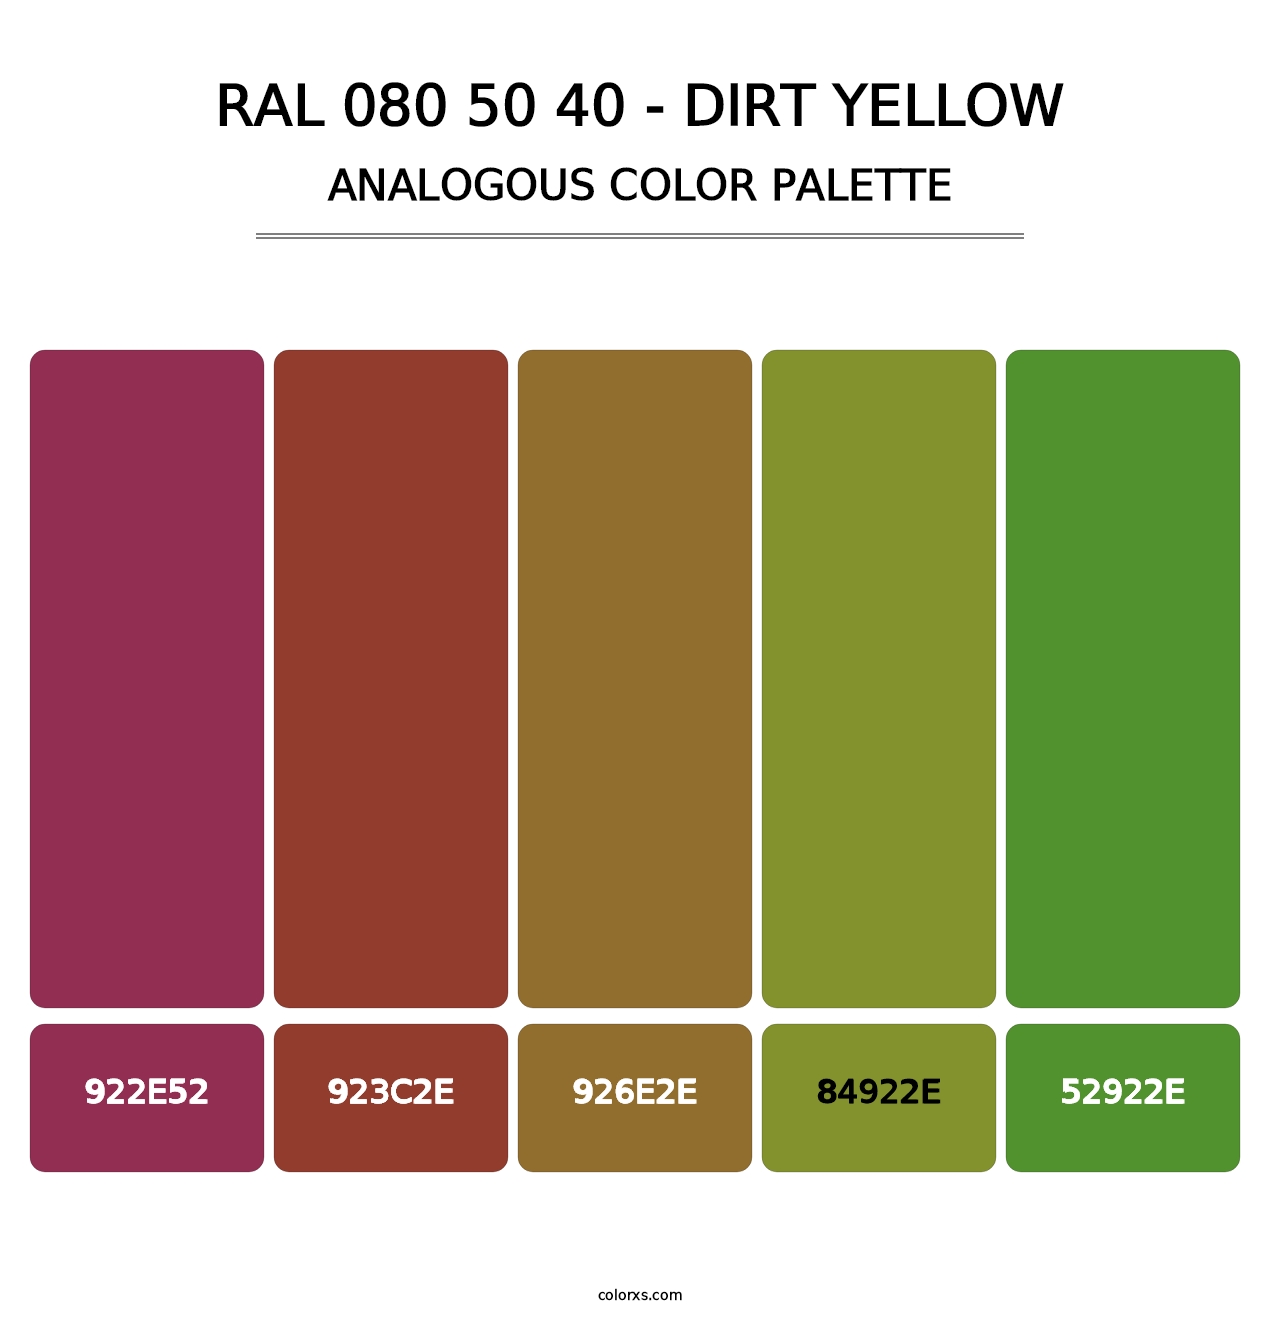 RAL 080 50 40 - Dirt Yellow - Analogous Color Palette